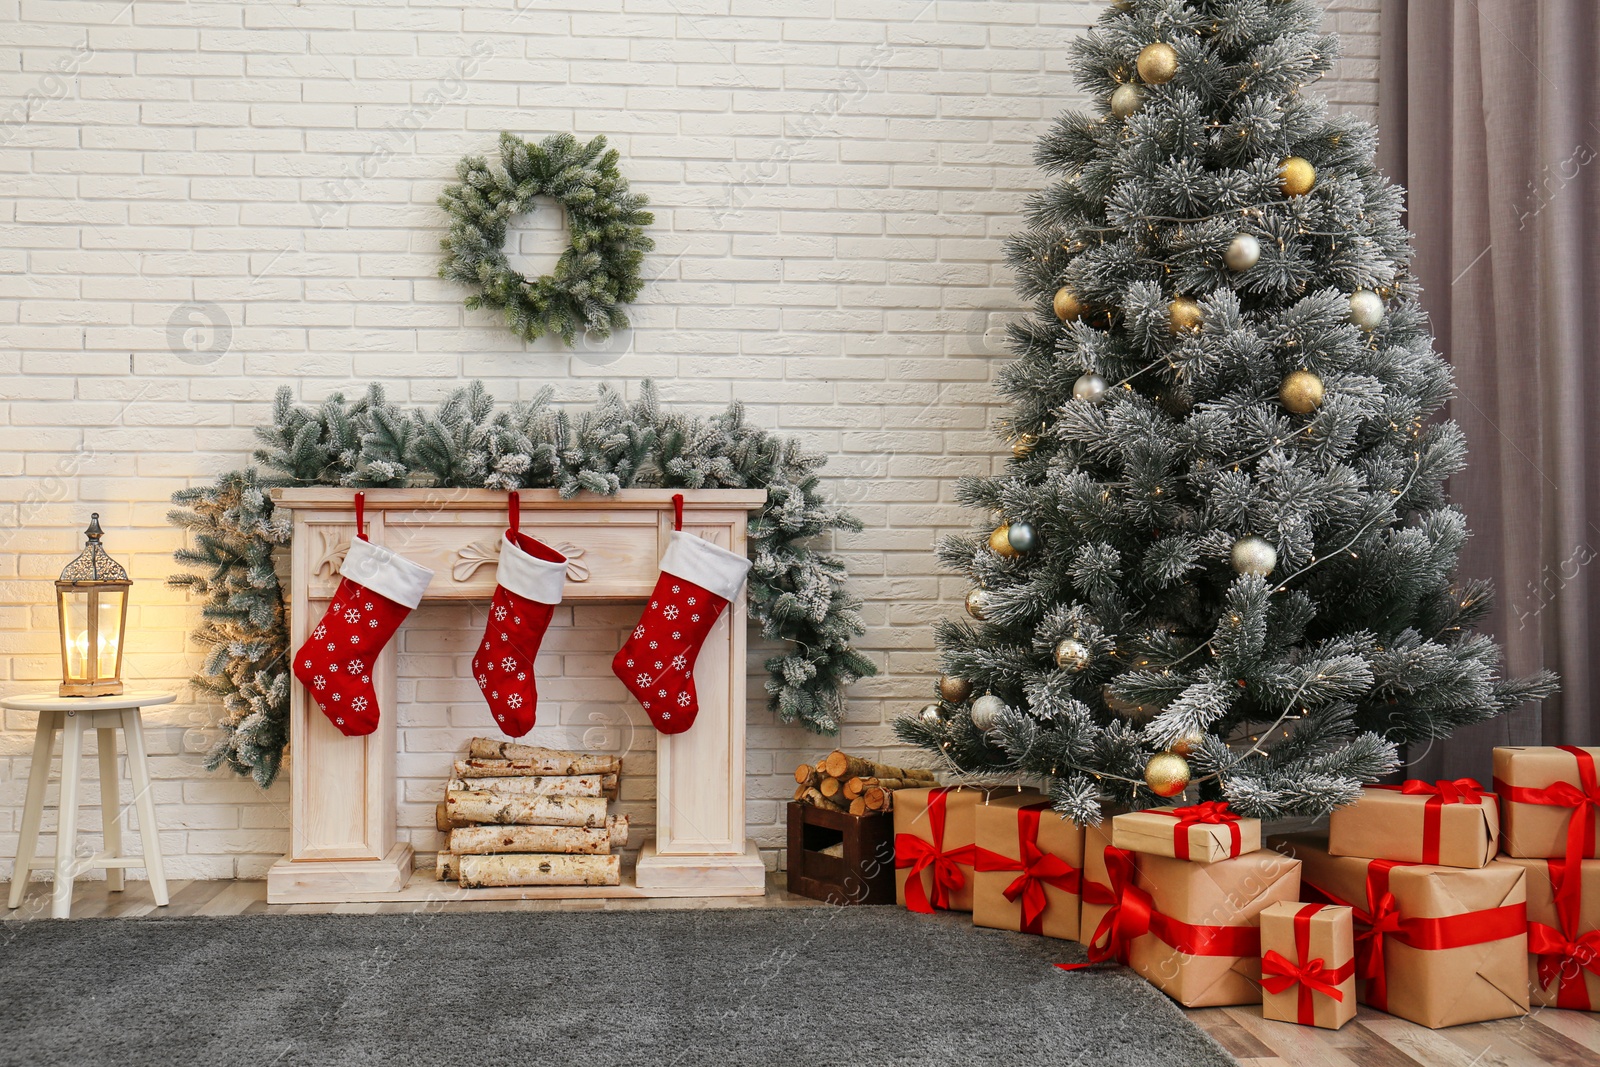 Photo of Stylish Christmas interior with decorated fir tree and fireplace